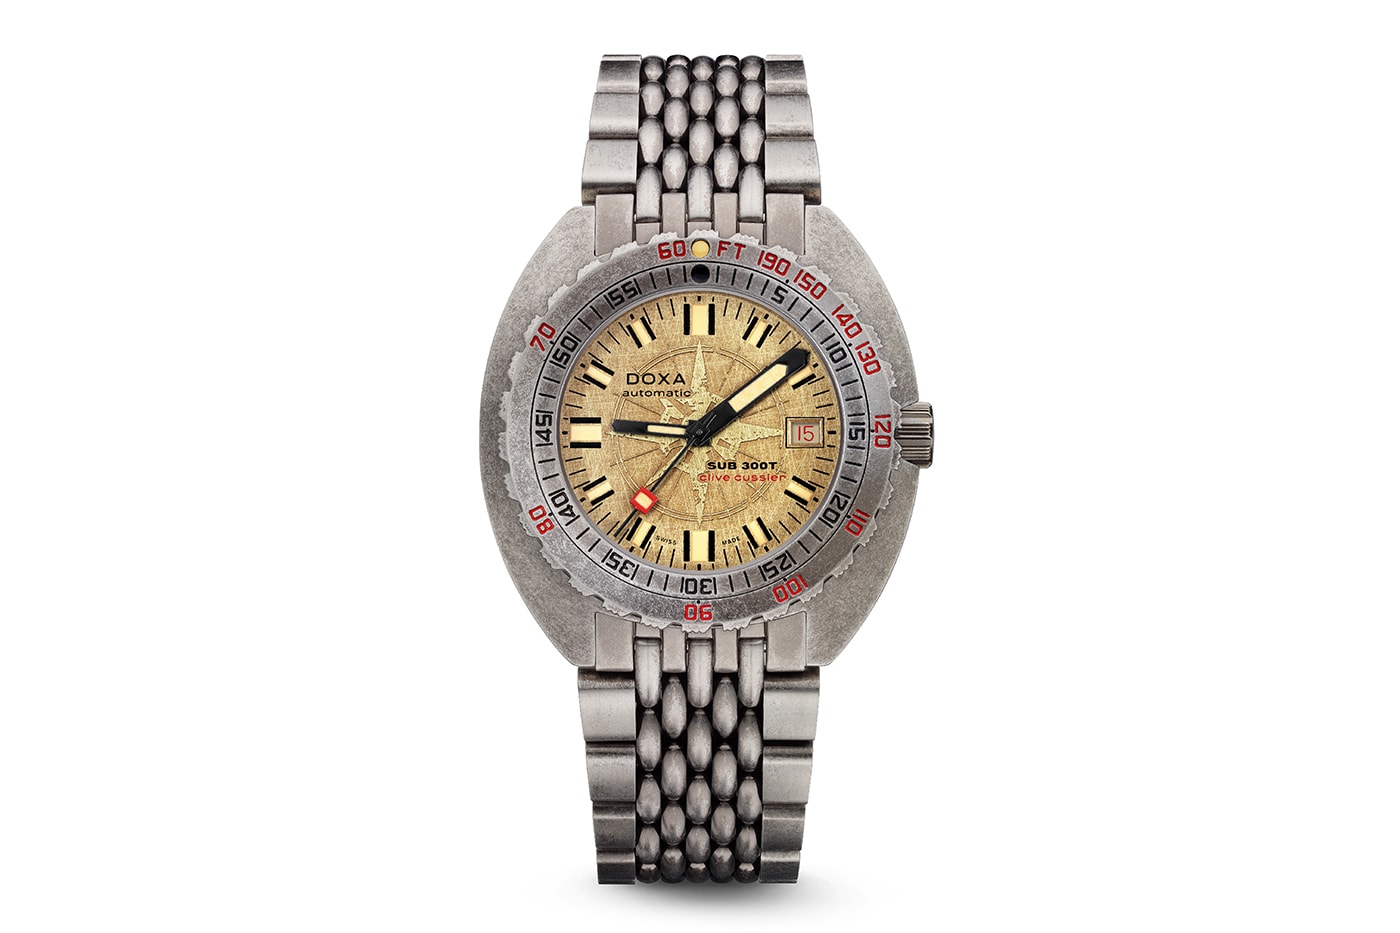 DOXA Sub 300T Clive Cussler Release Info